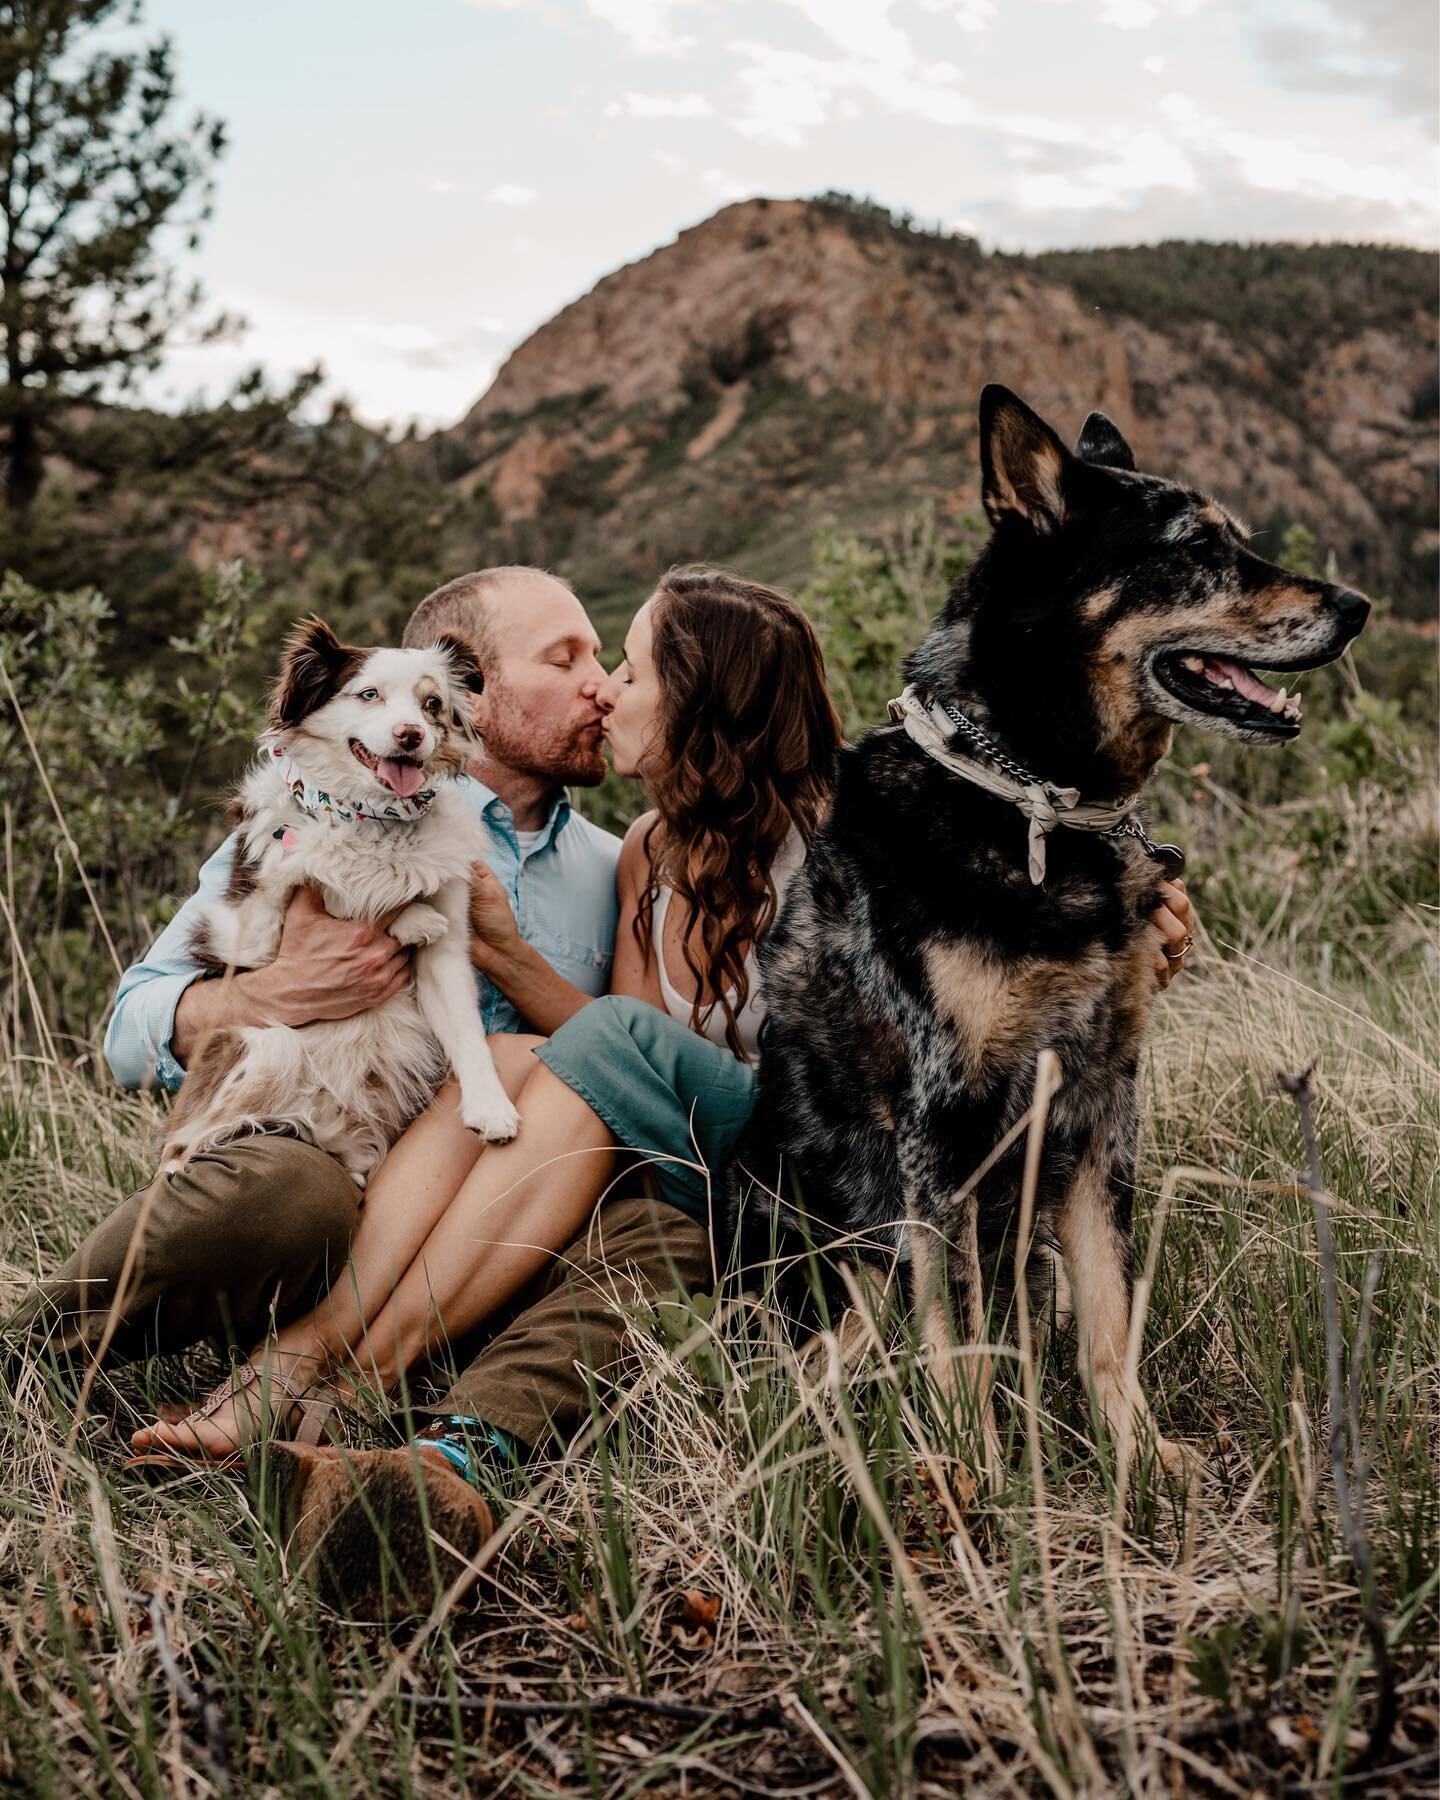 10/10 times YES you should always bring your doggos with you to your engagement session. 🐶 Furry friends are ALWAYS welcome to join in on the fun!
-
-
-

#coloradophotographer #coloradospringsphotographer #coloradospringsengagementphotographer #colo